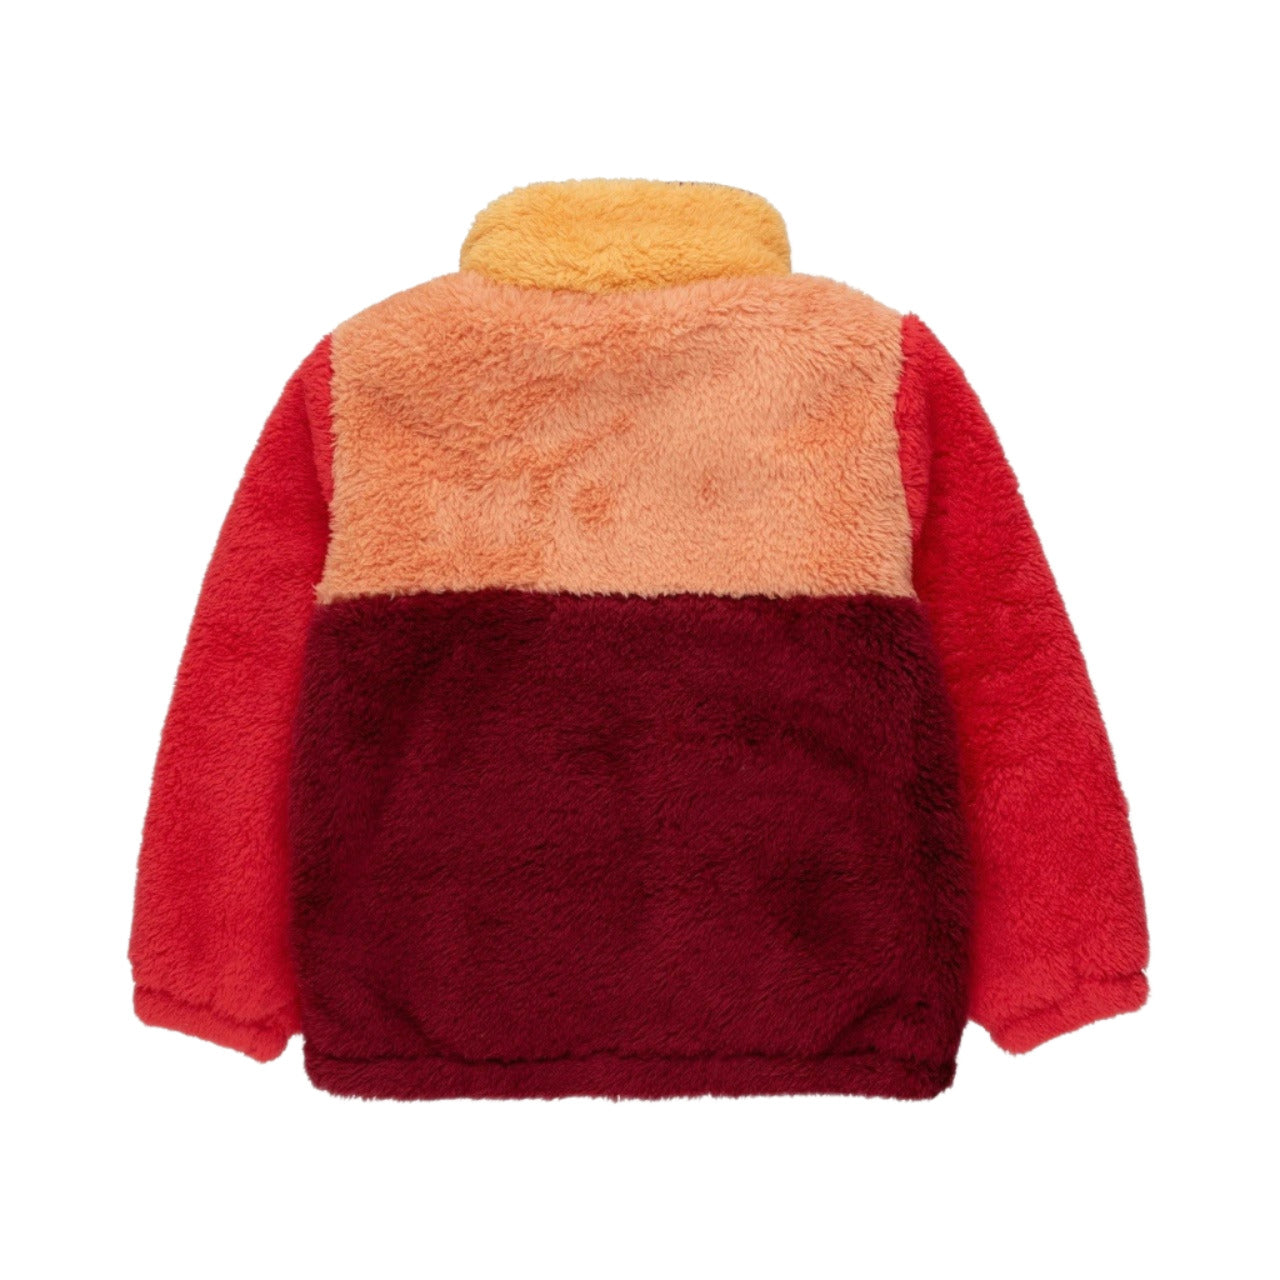 ﻿TINYCOTTONS Color Block Polar Sherpa Jacket Deep Red Peach ALWAYS SHOW